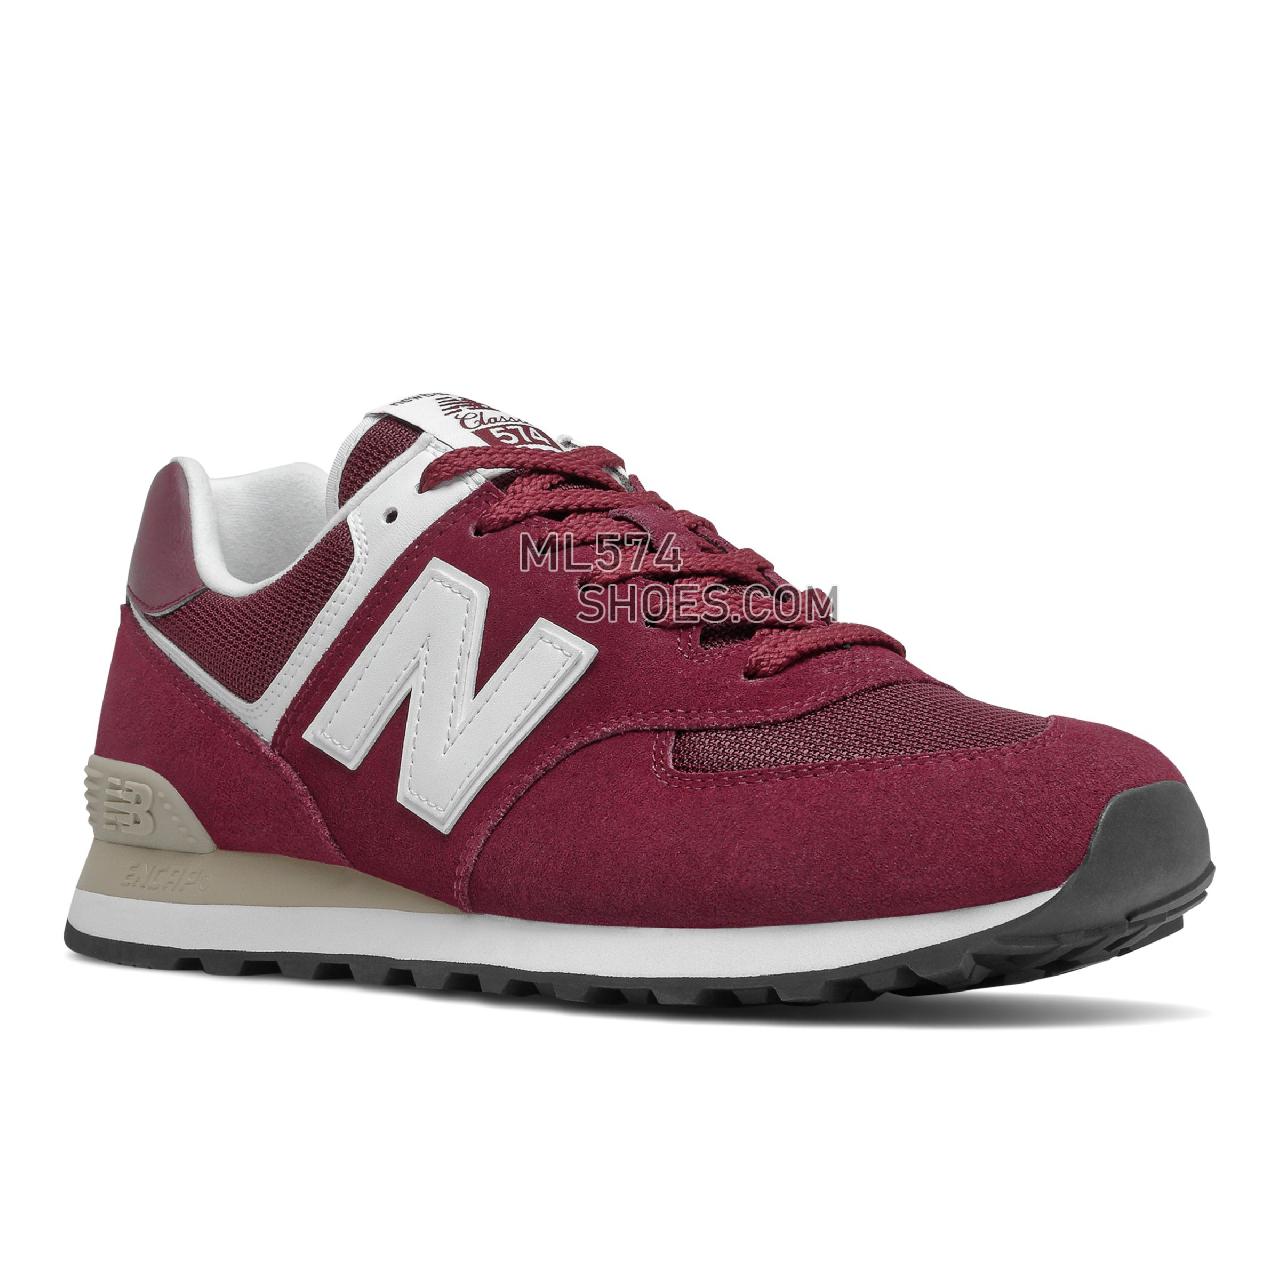 New Balance 574v2 - Men's Classic Sneakers - Garnet with White - ML574RS2